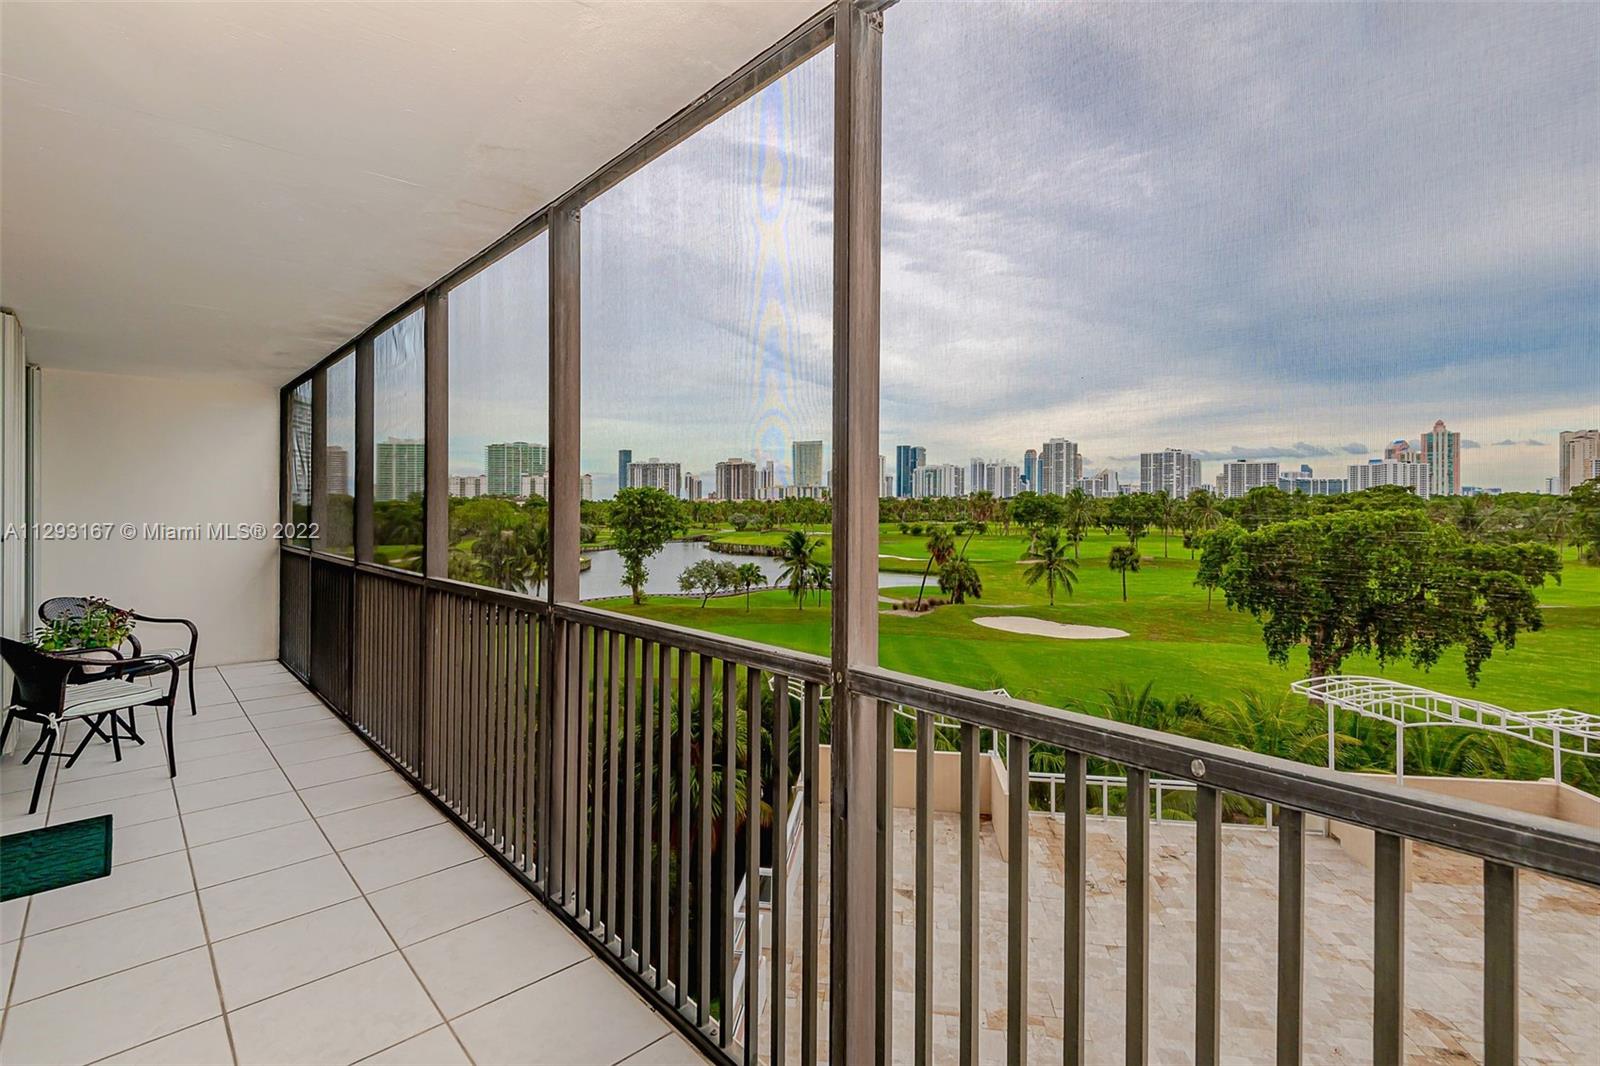 **BEST LINE AND LARGEST UNIT AVAILABLE IN BUILDING** DIRECT EASTERN SIDE GOLF COURSE VIEW COMPLETE WITH TILES THRUOUT, HURRICANE SHUTTERS, PRIVATE 40 FOOT BALCONY, GARAGE PARKING, 24 HOURS SECURITY, ALL AGES WELCOME, RIGHT IN THE HEART OF AVENTURA, WALKING TO HOUSES OF WORSHIP AND MUCH MORE,,,**40 YEARS INSPECTION DONE, MAINTENANCE INCLUDES, WATER, CABLE, INTERNET ... COURTESY BUS AVAILABLE BY YOUR FRONT DOOR.